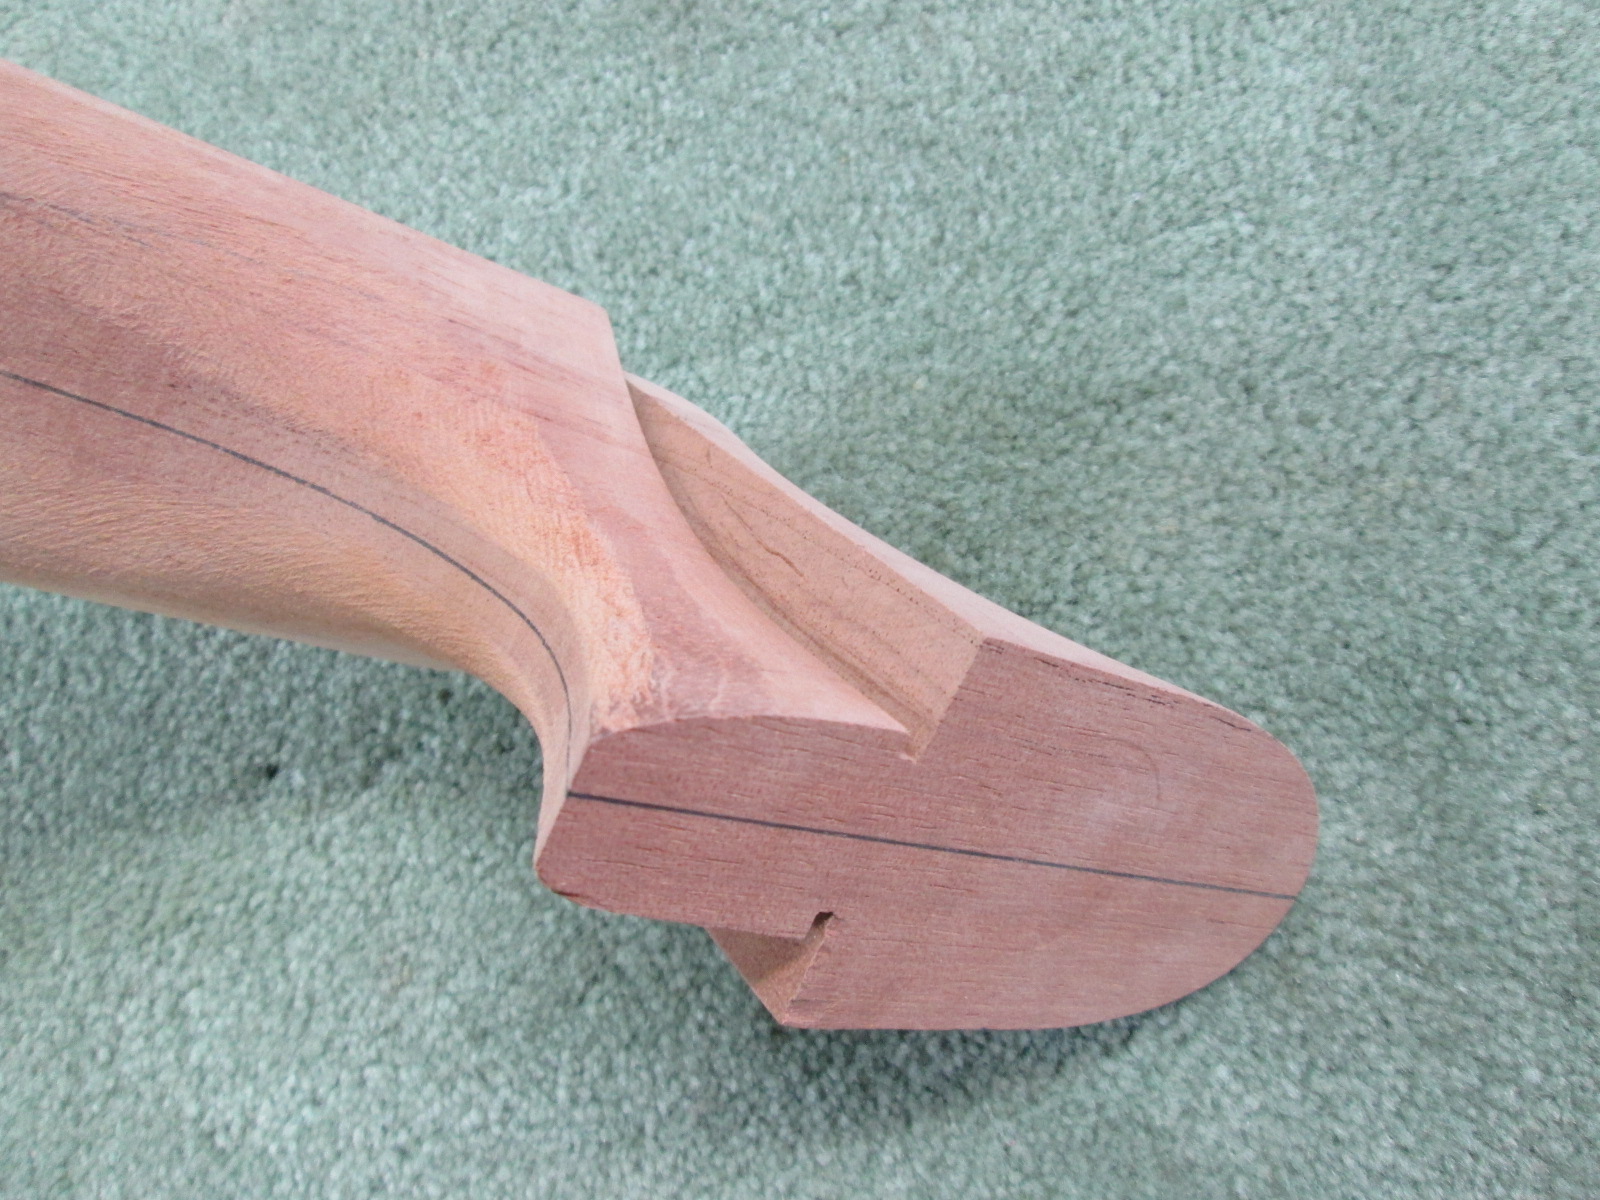  View of the neck of the Lenvers from the inner and outer sides of the heel.